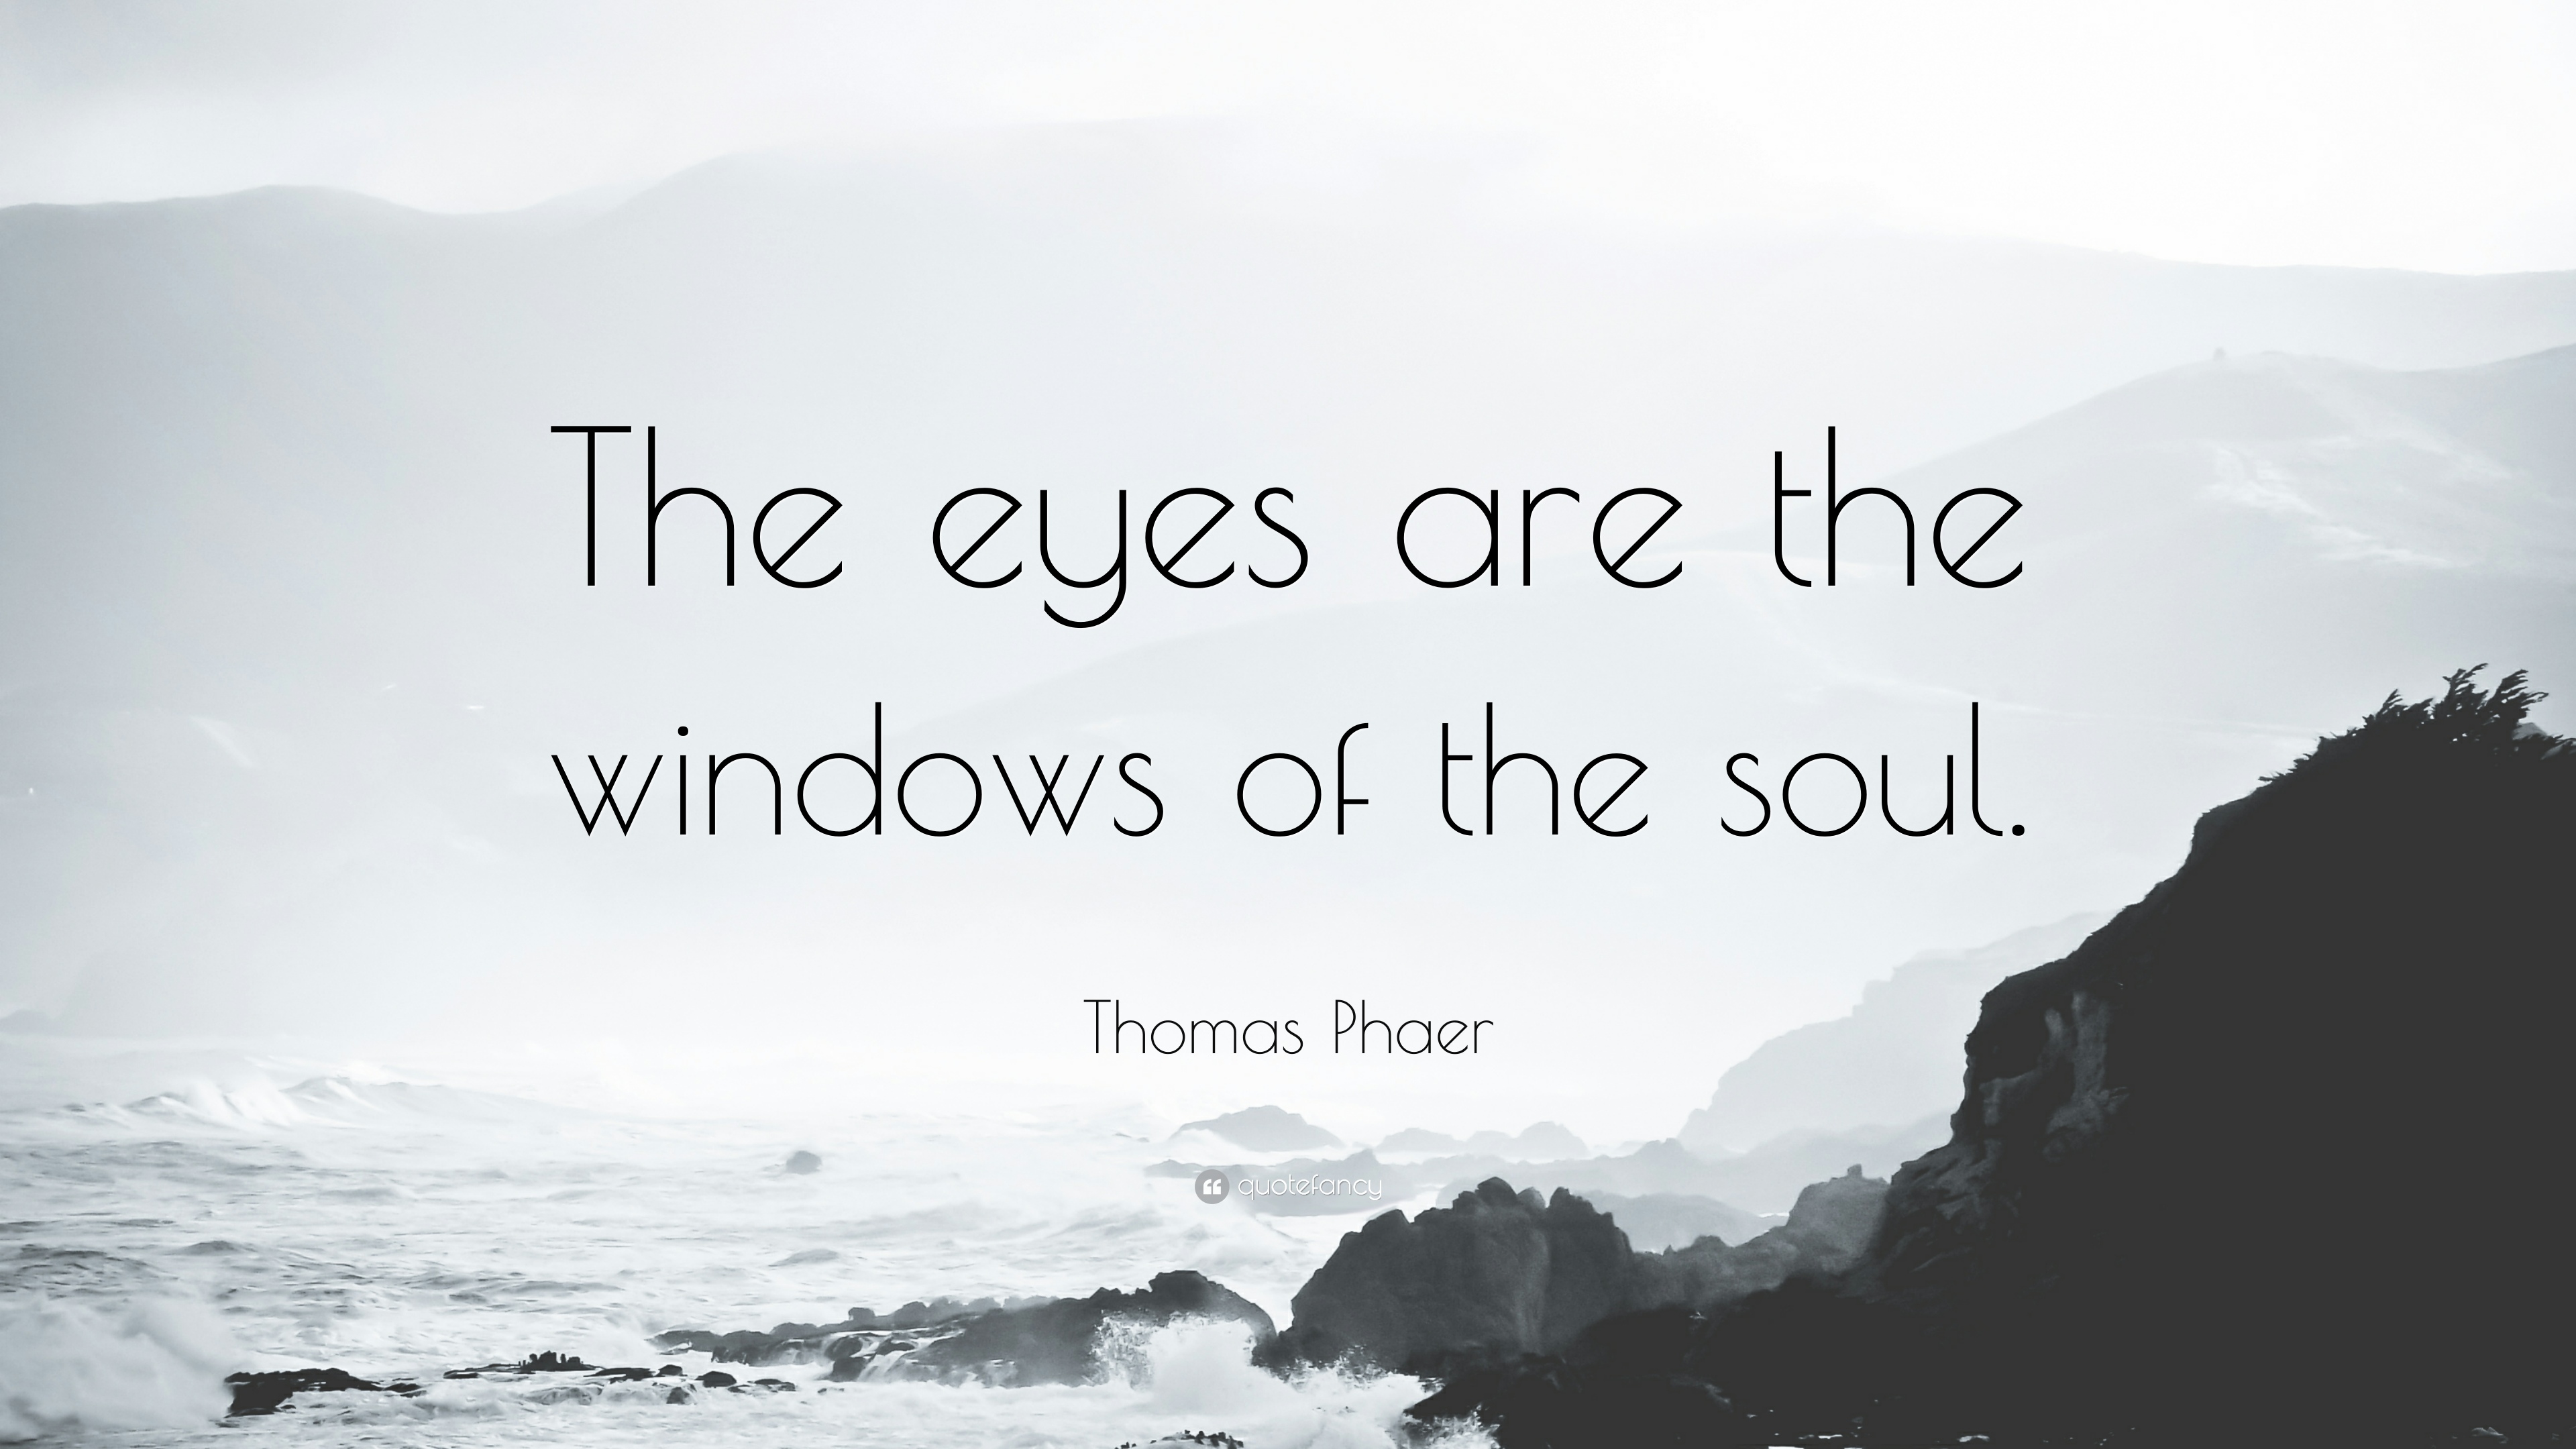 1670572-Thomas-Phaer-Quote-The-eyes-are-the-windows-of-the-soul - Millefior...